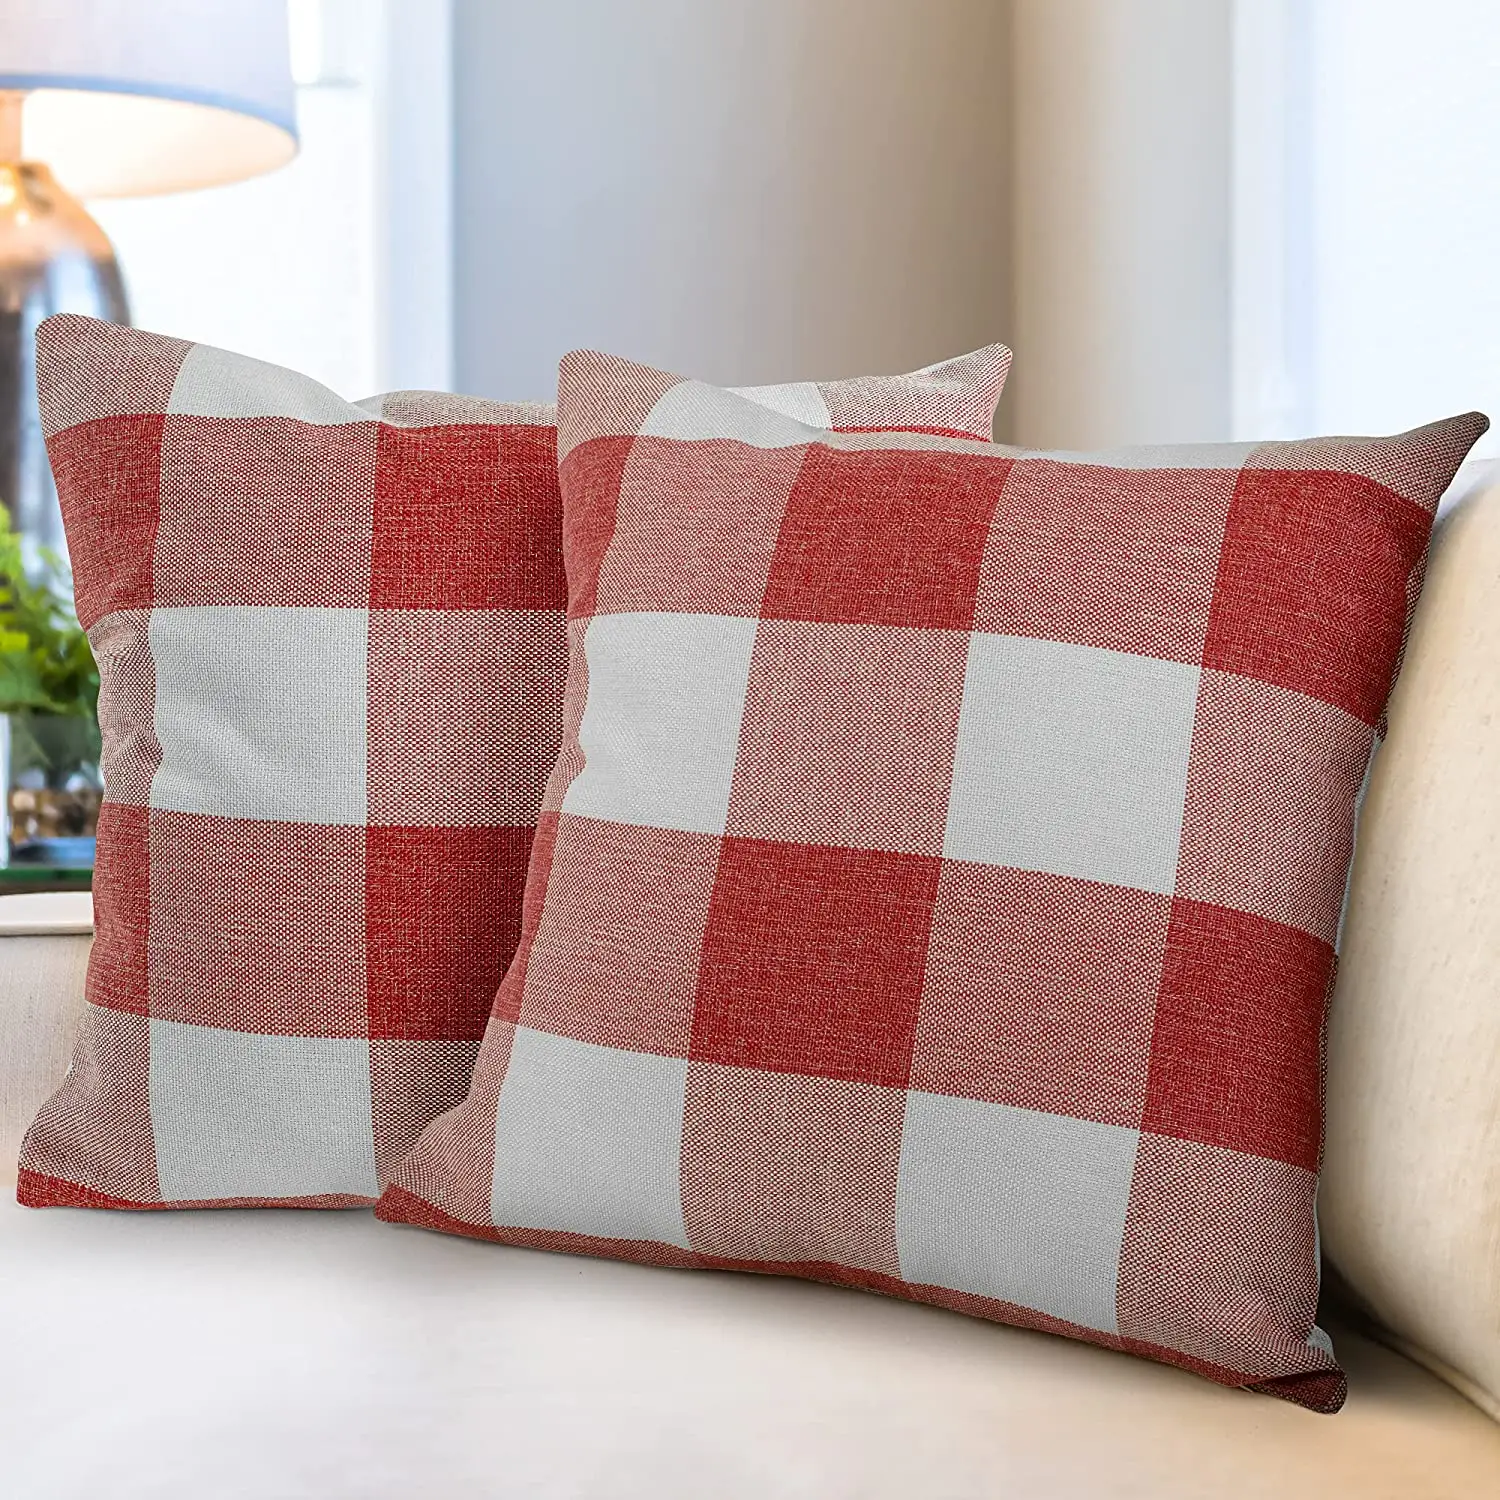 Zulay Home Buffalo Plaid Throw Pillow Covers - Pack Of 2